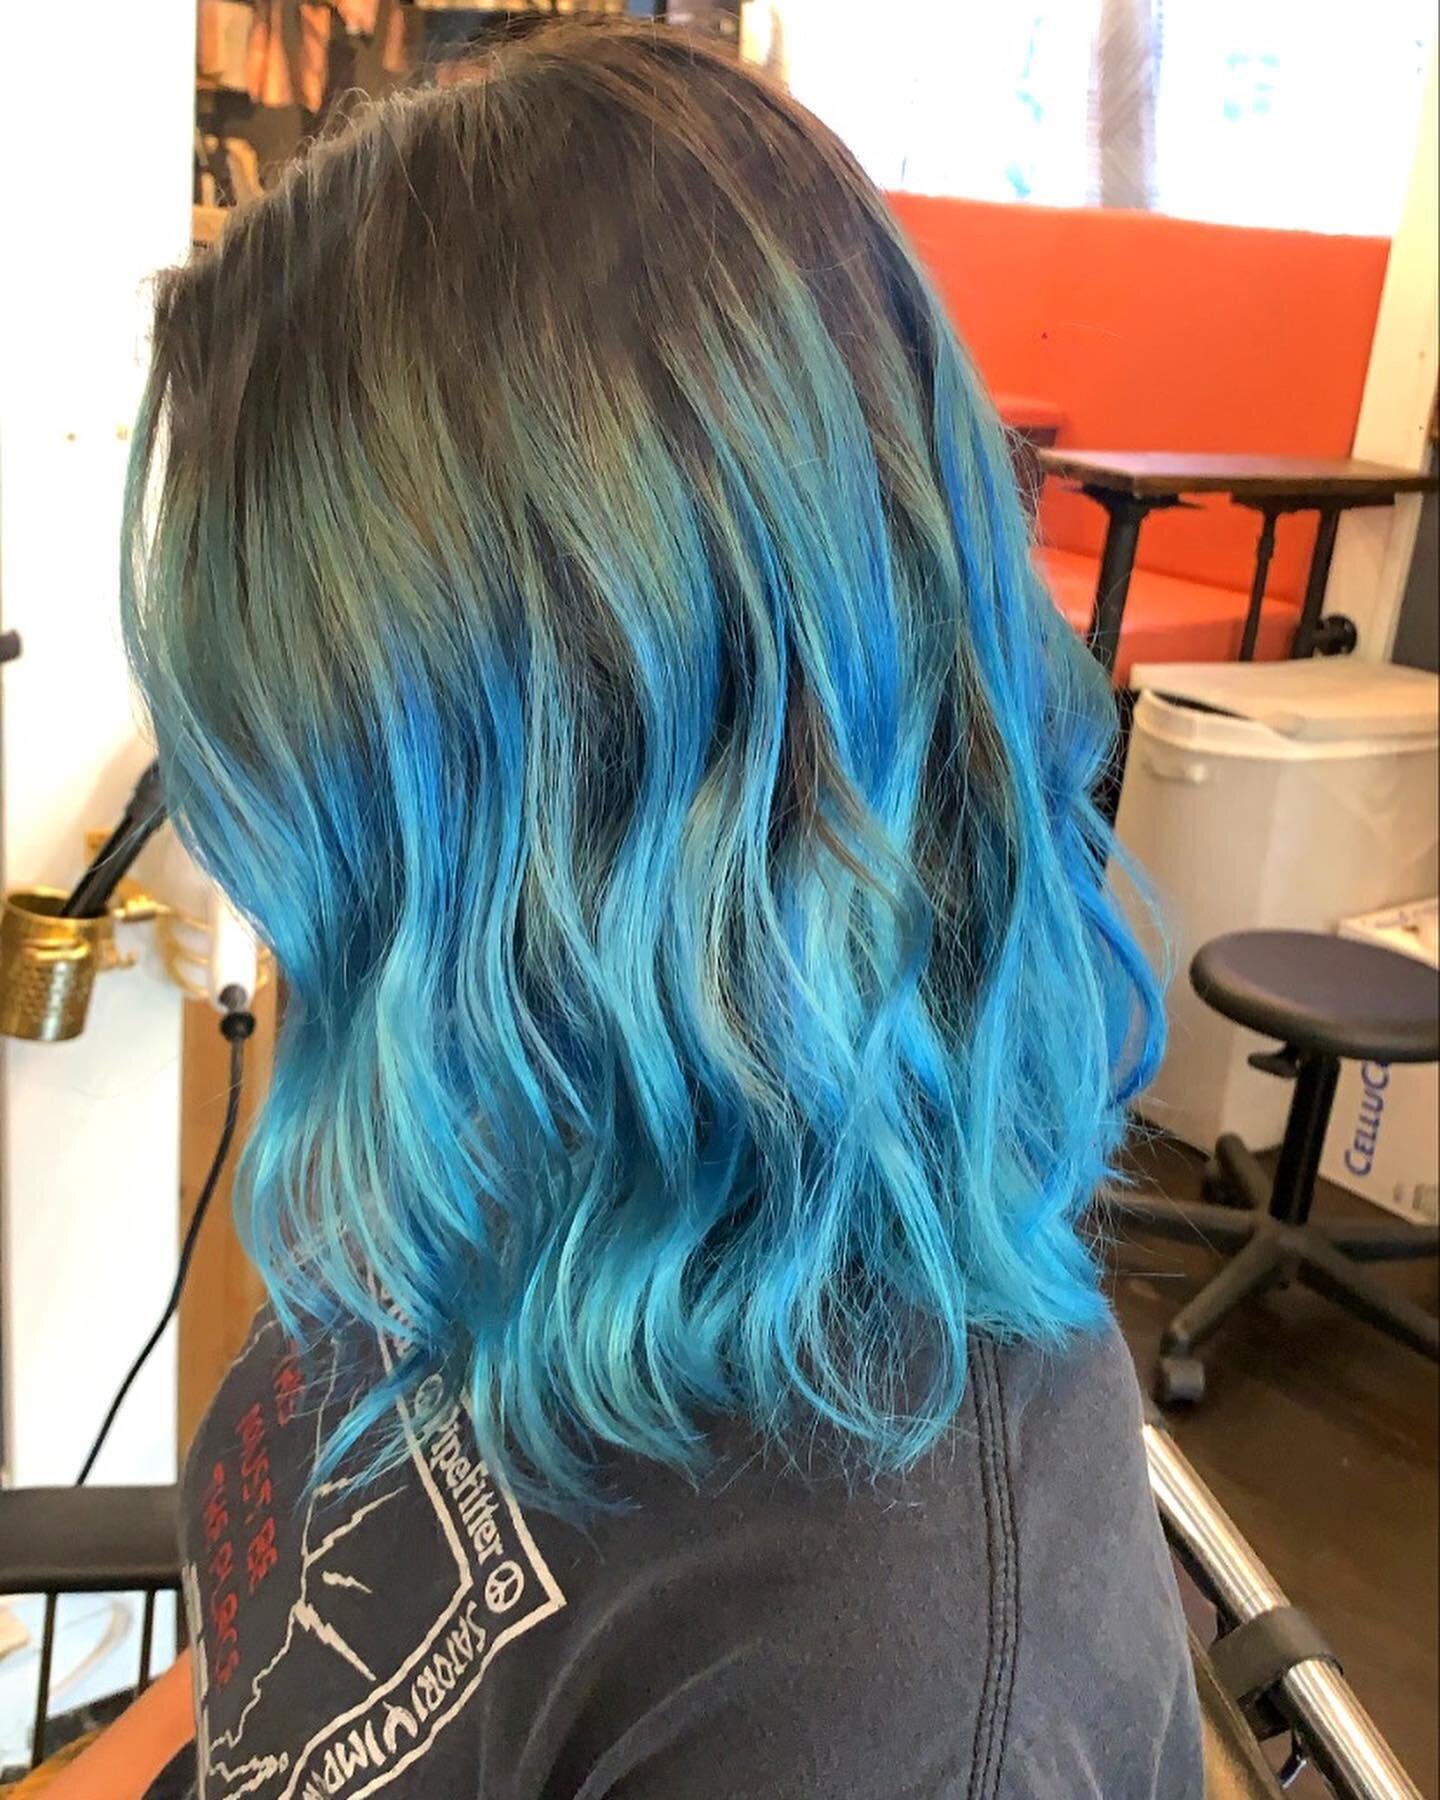 Is this what it feels like to taste 5 gum?! 🥶 #fadedrosesbarber #midwestbeautyhouse #redkinshadeseq #redkinshades #haircolor #bluehair #funkyhaircolor #madisonwisconsin #madisonsalon #madisonbarber #wisconsinbarber